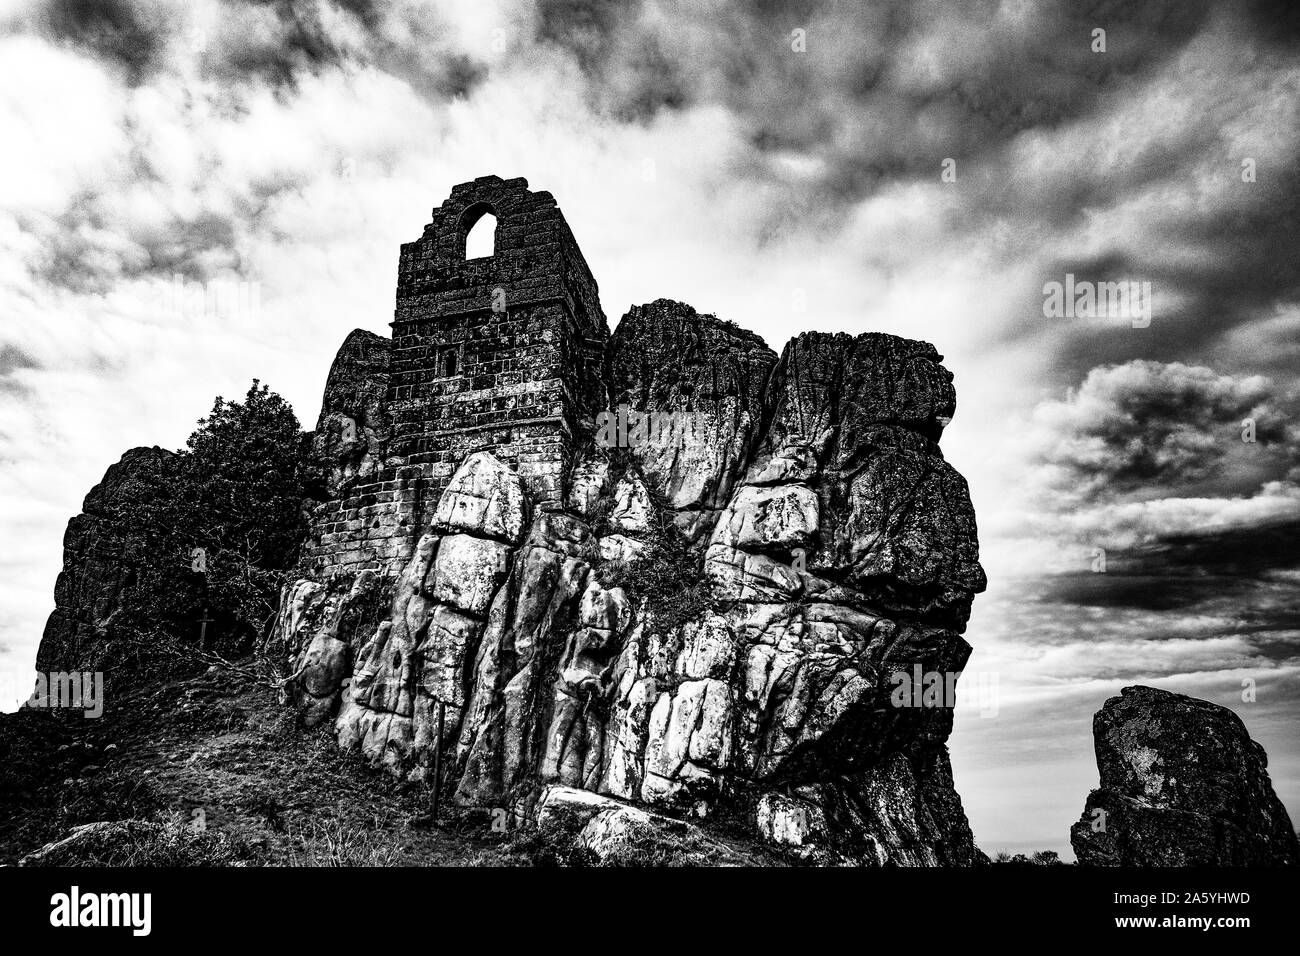 roche rock with the ruins of an ancient chapel built into it, roche, cornwall, england. Stock Photo